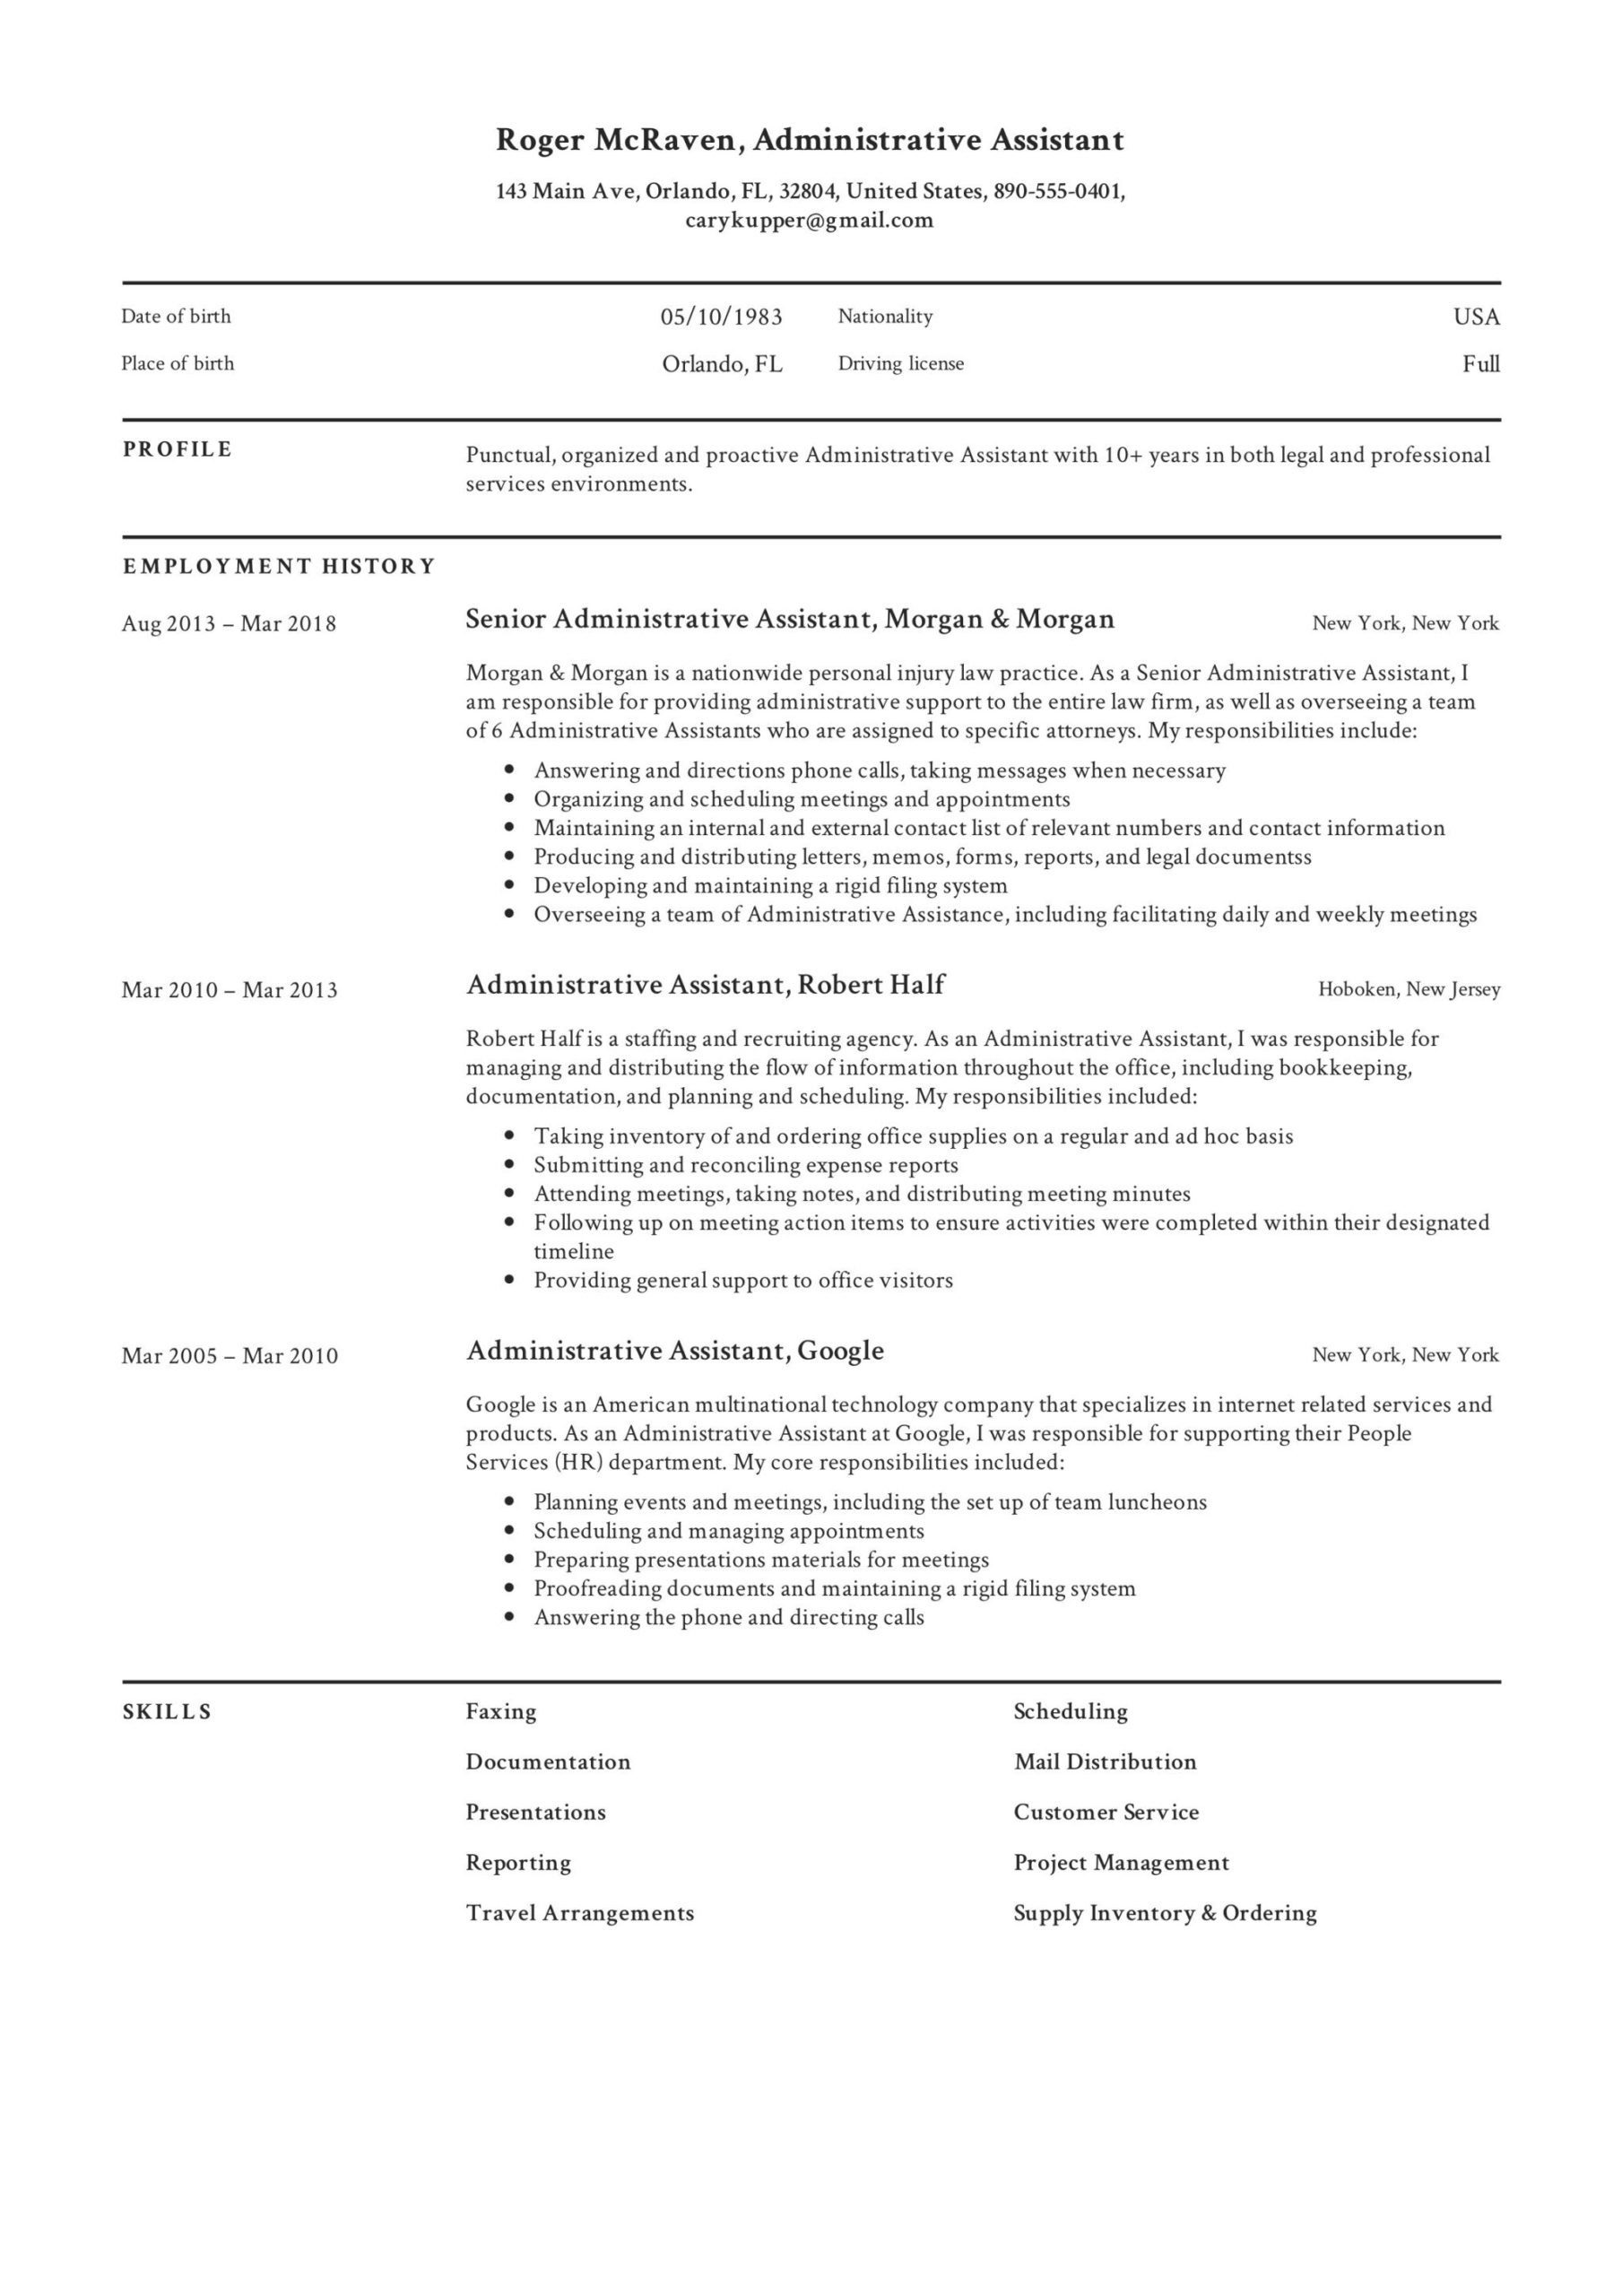 Sample Of Functional Administrative assistant Resumes 19 Administrative assistant Resumes & Guide Pdf 2022